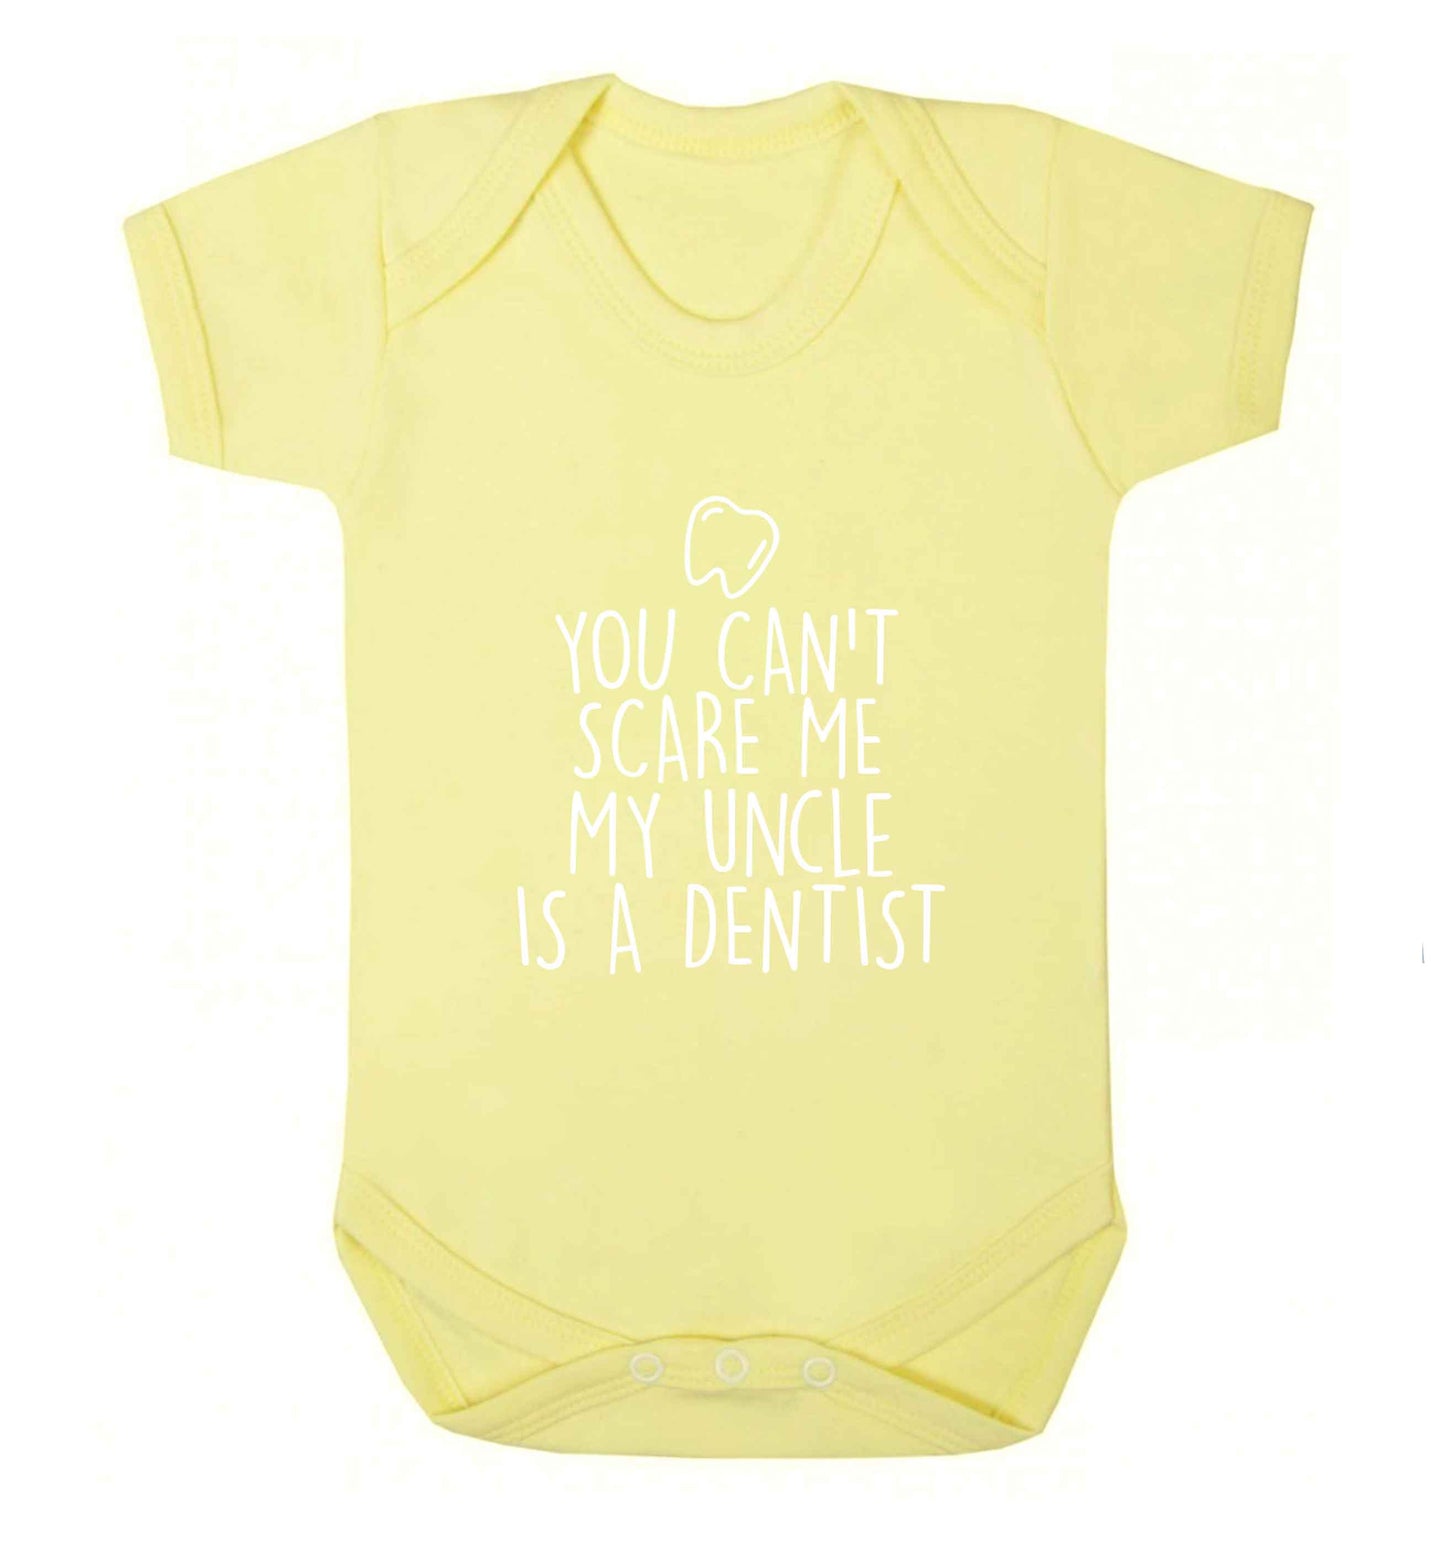 You can't scare me my uncle is a dentist baby vest pale yellow 18-24 months